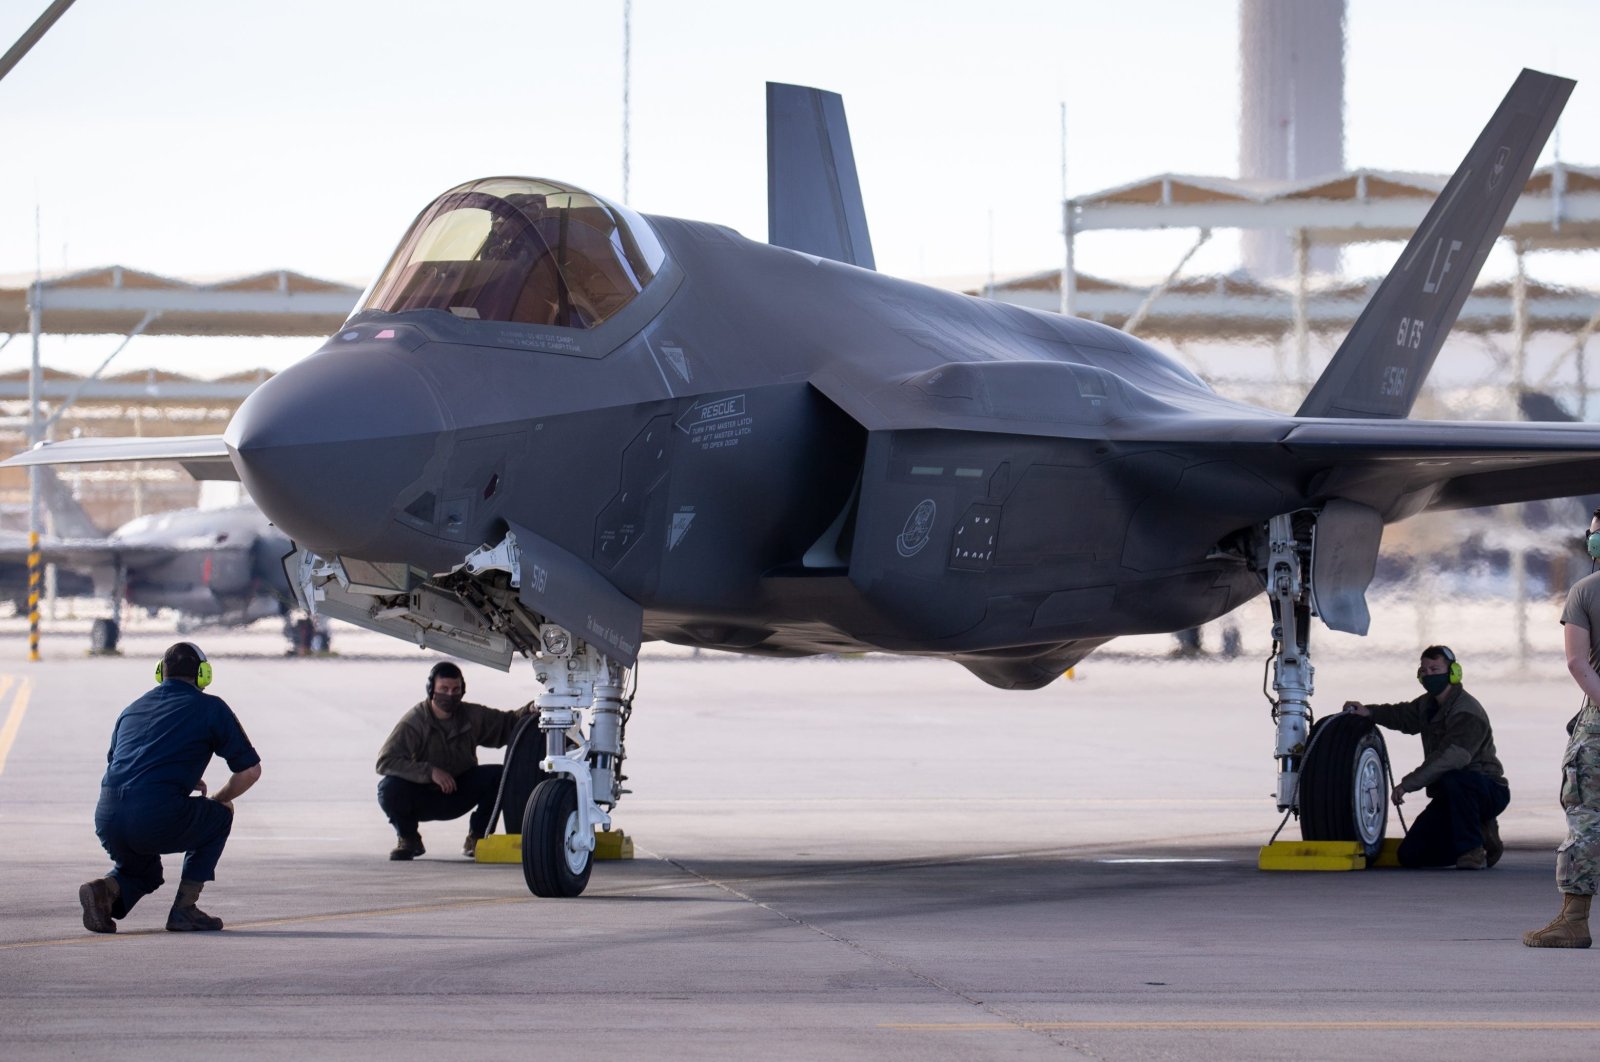 An F-35 readies to leave the flight line for a sortie at Luke Air Force Base in Glendale, Arizona, U.S. Feb. 16, 2021. (Reuters Photo)